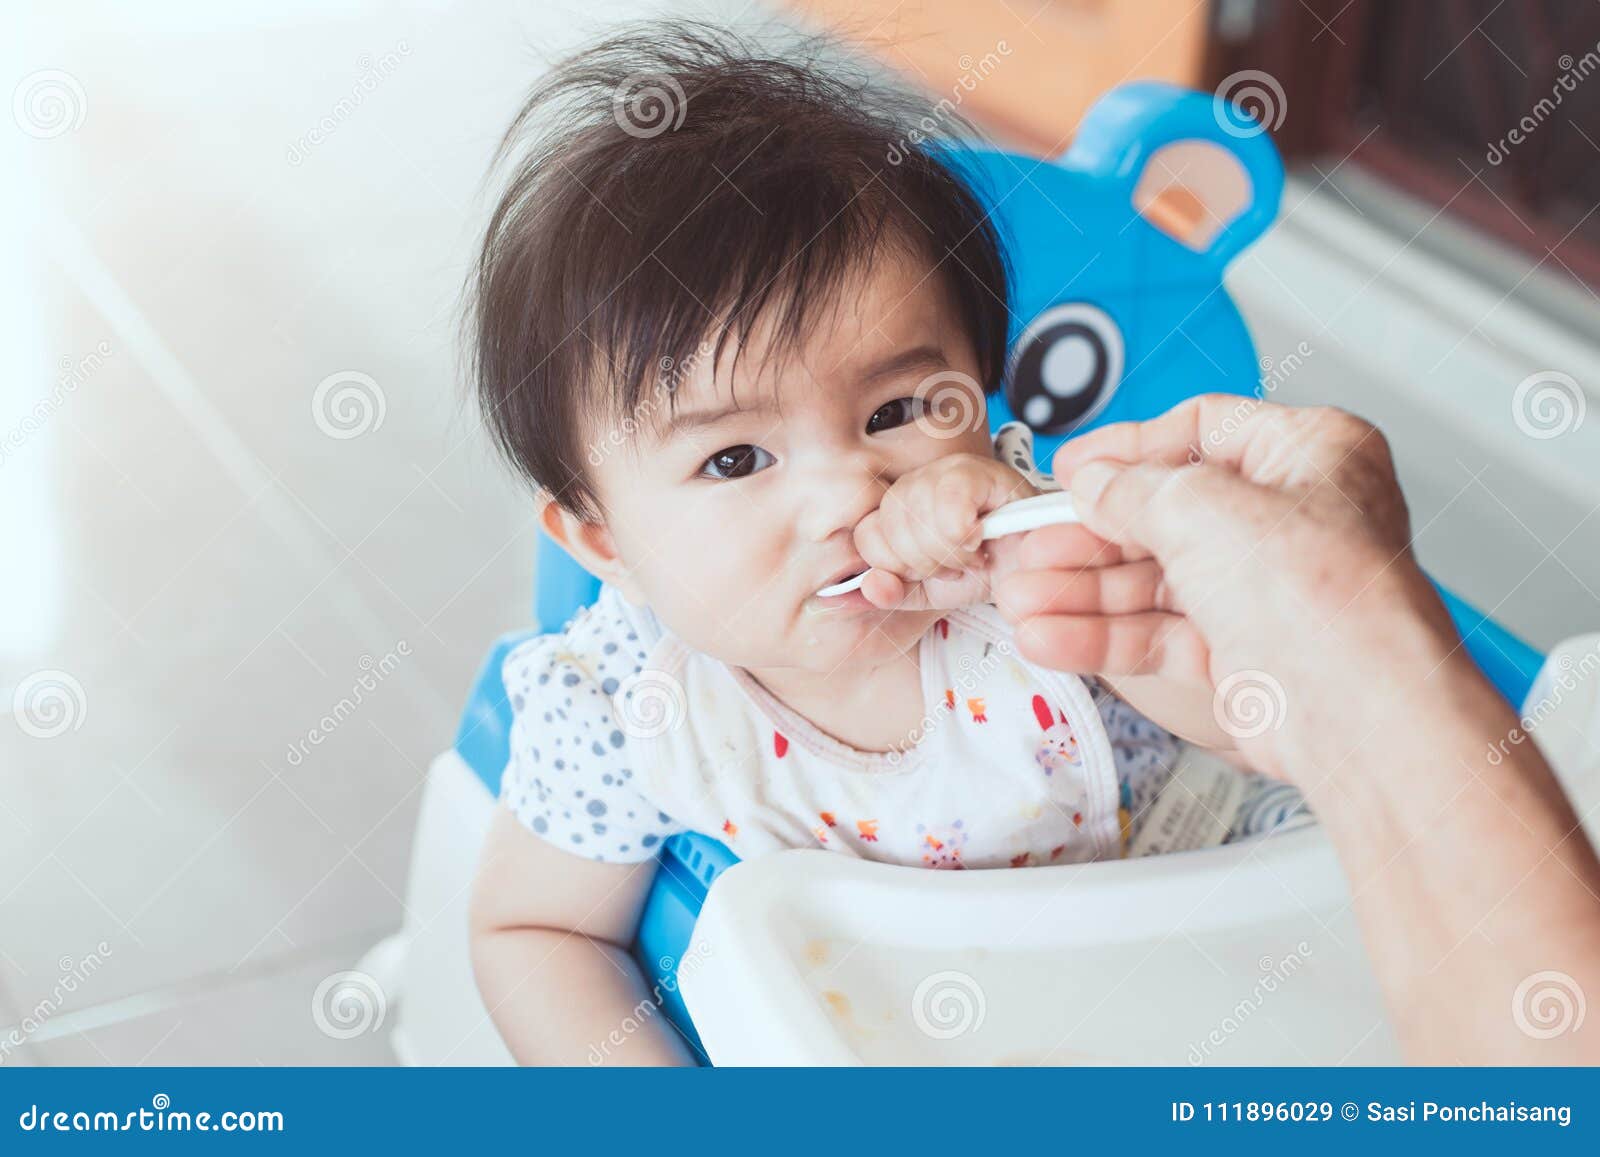 Grandmother Feeding Cute Asian Baby Girl With A Spoon Stock Image